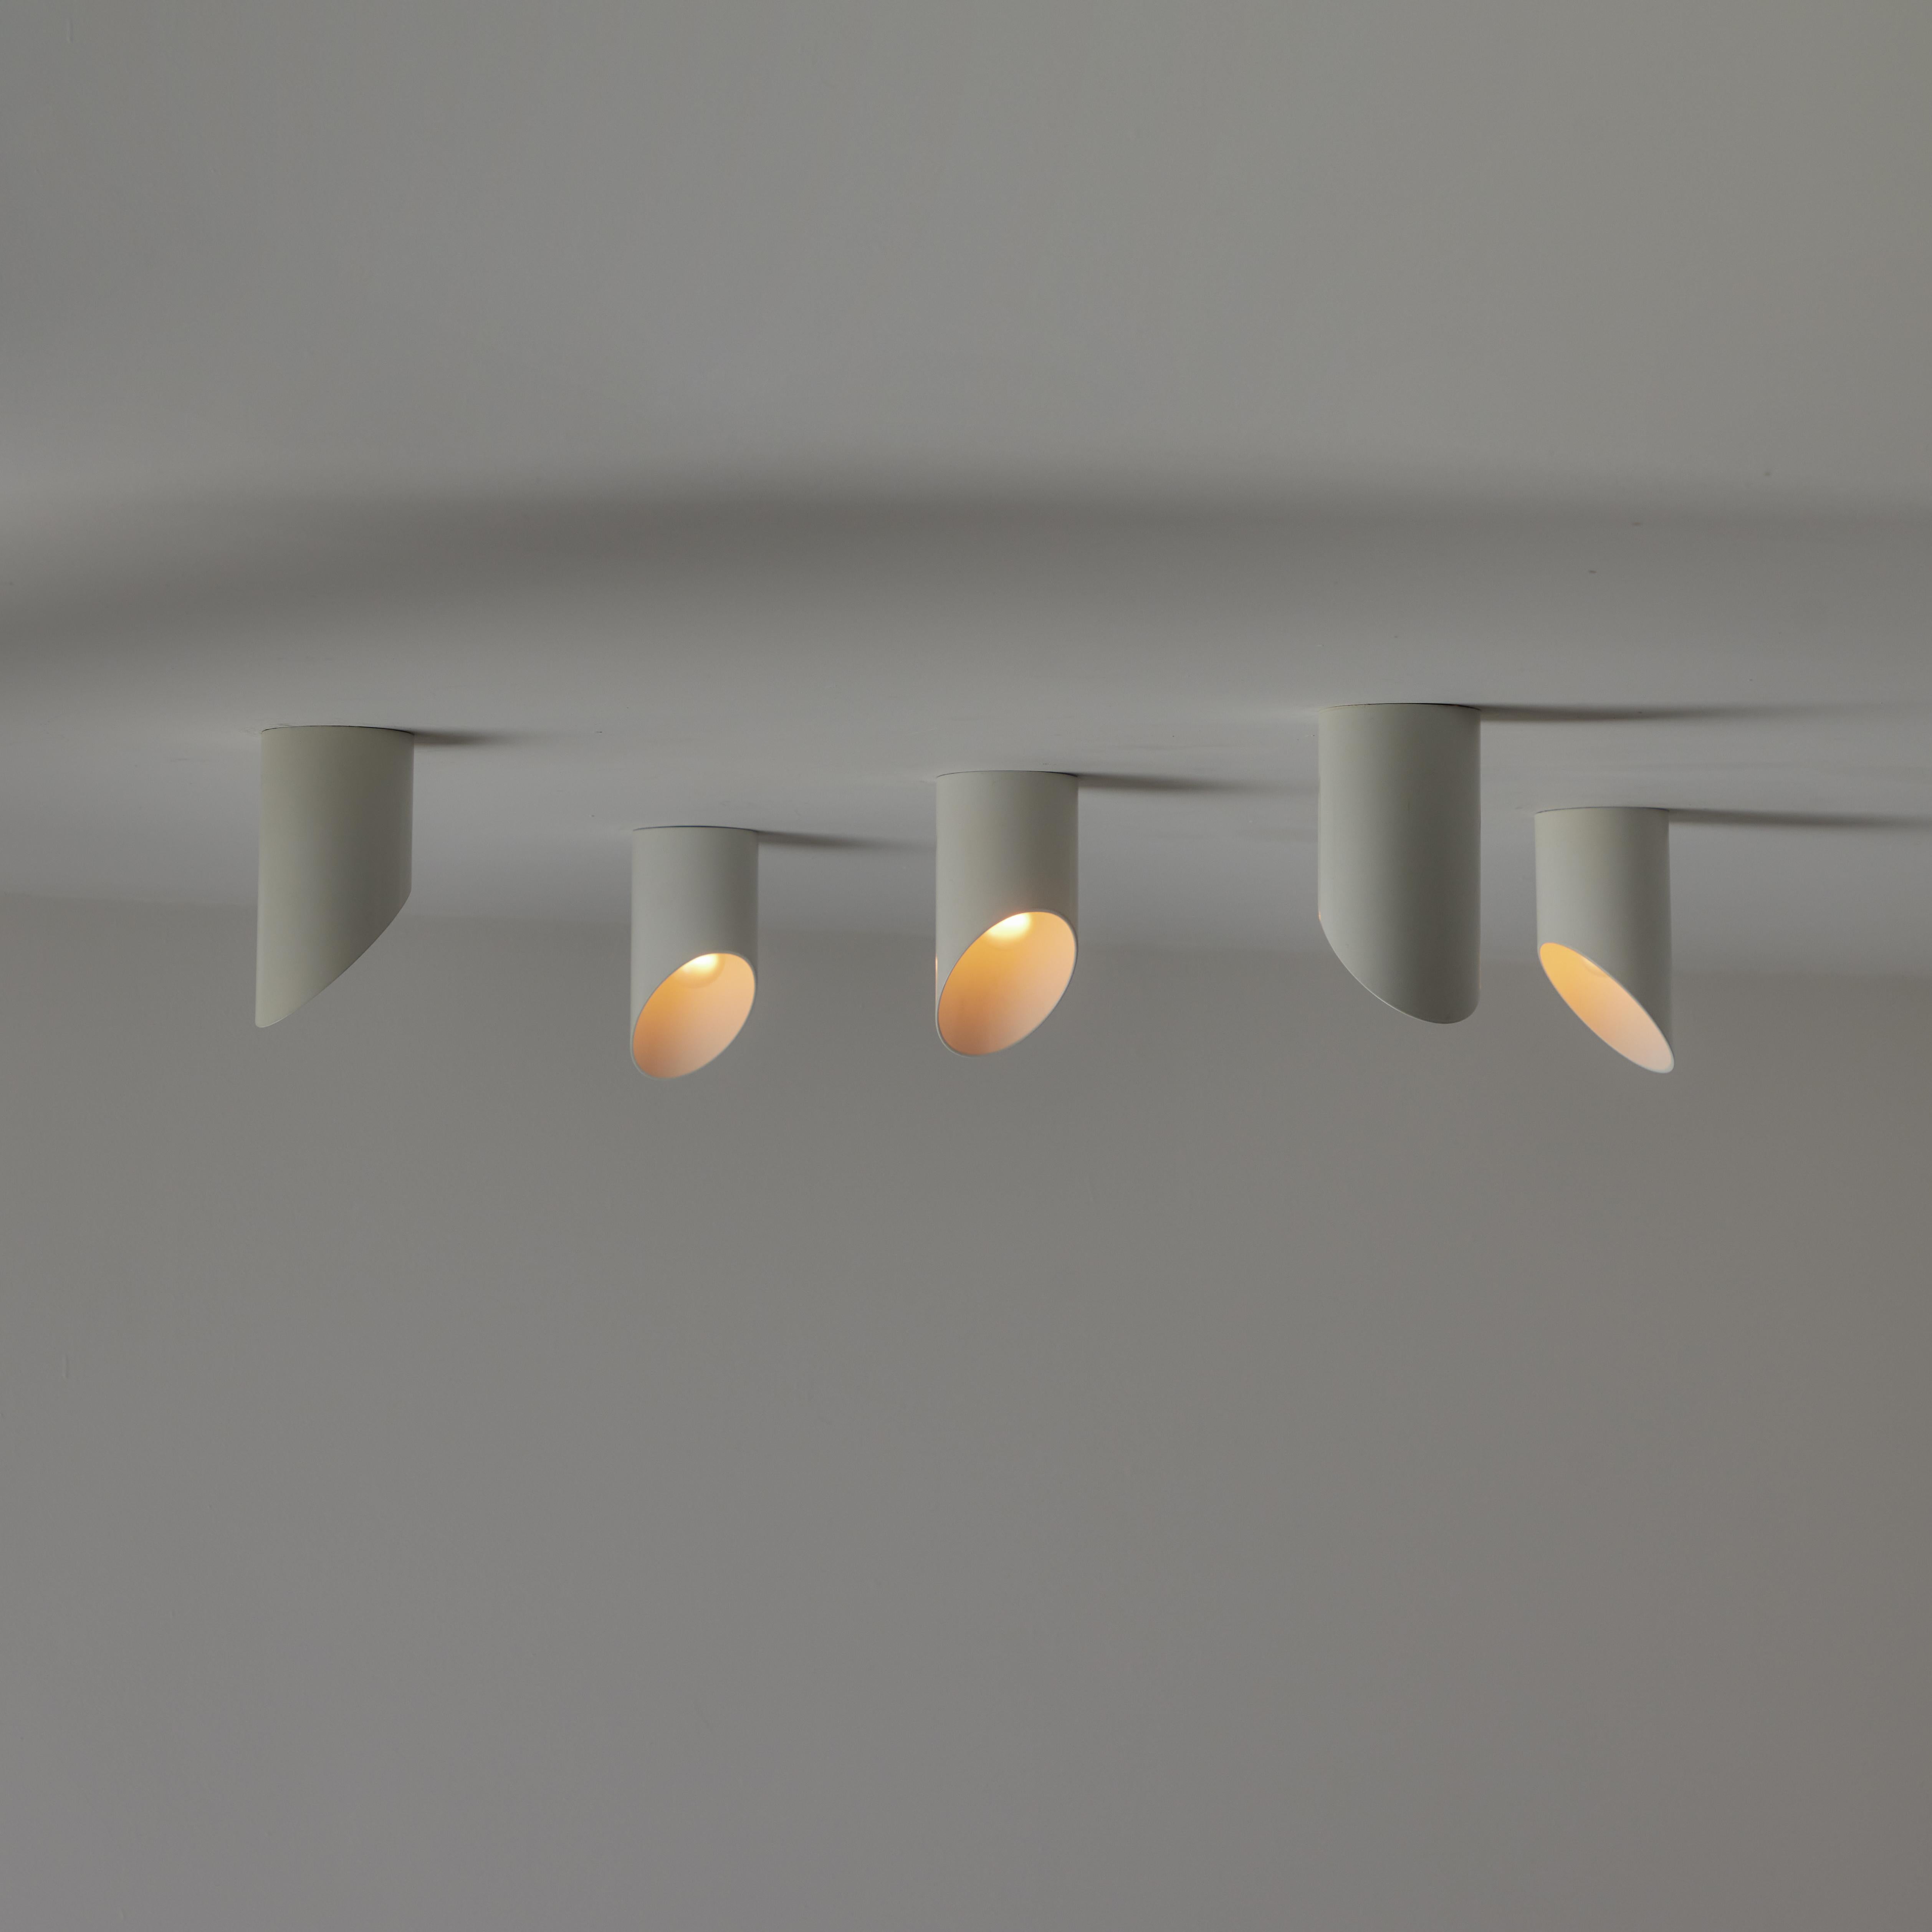 'Obliqua' Ceiling or Wall Lights by Claudio Dini for Bieffeplast. Designed and manufactured in Italy, circa the 1970s. Minimal cylinders which can be installed on either wall or ceiling. These lights have the ability to be rotated to 360 degrees to